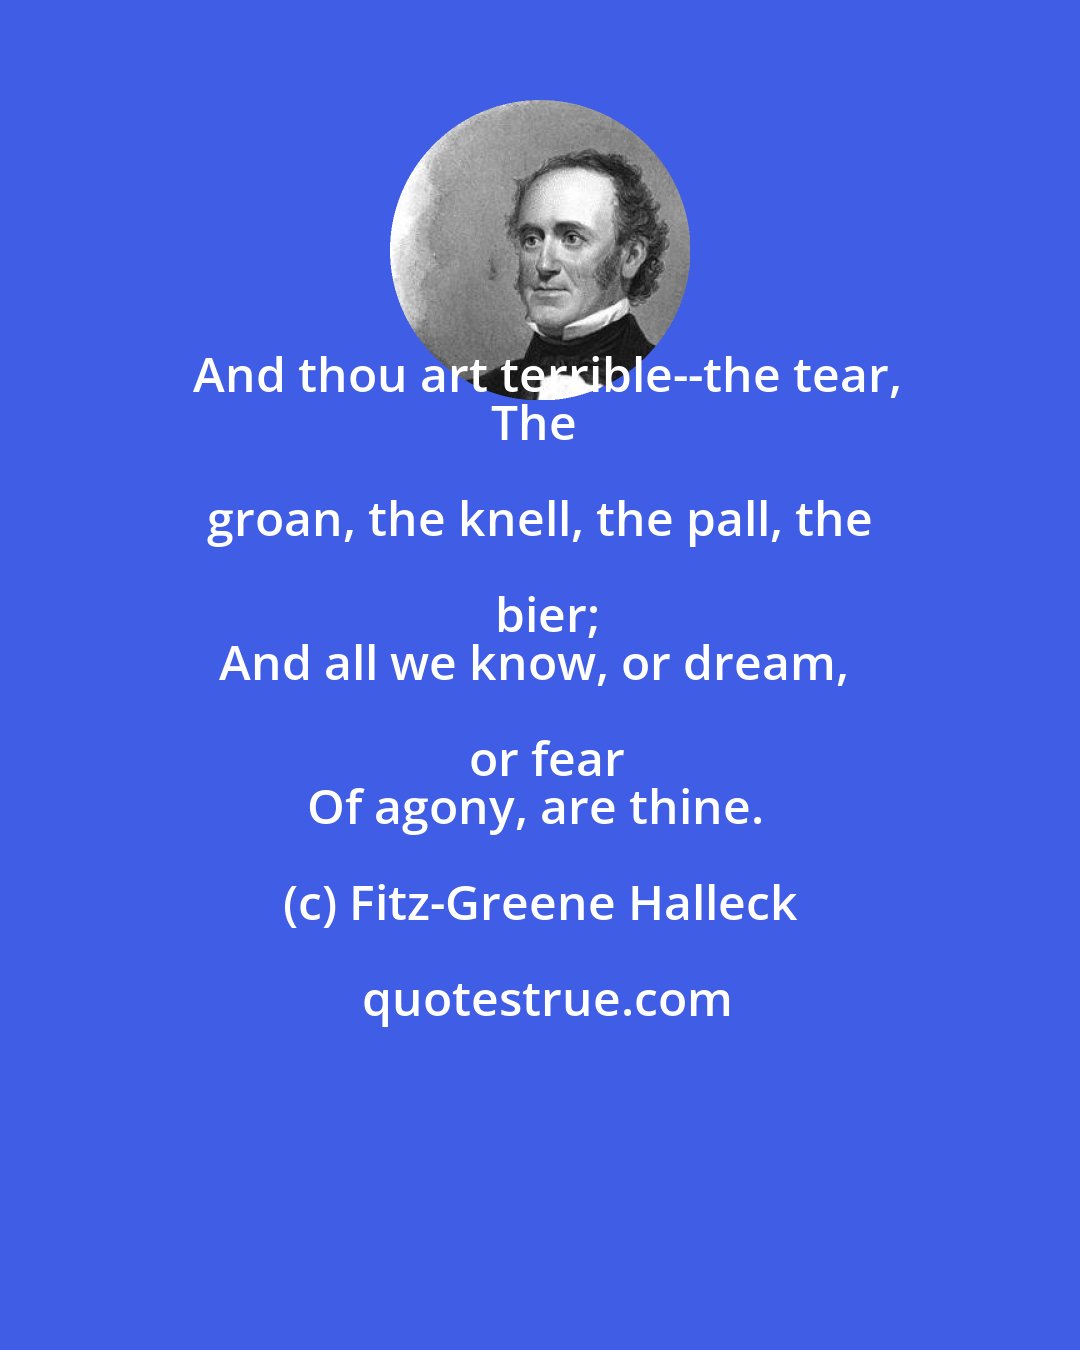 Fitz-Greene Halleck: And thou art terrible--the tear,
The groan, the knell, the pall, the bier;
And all we know, or dream, or fear
Of agony, are thine.